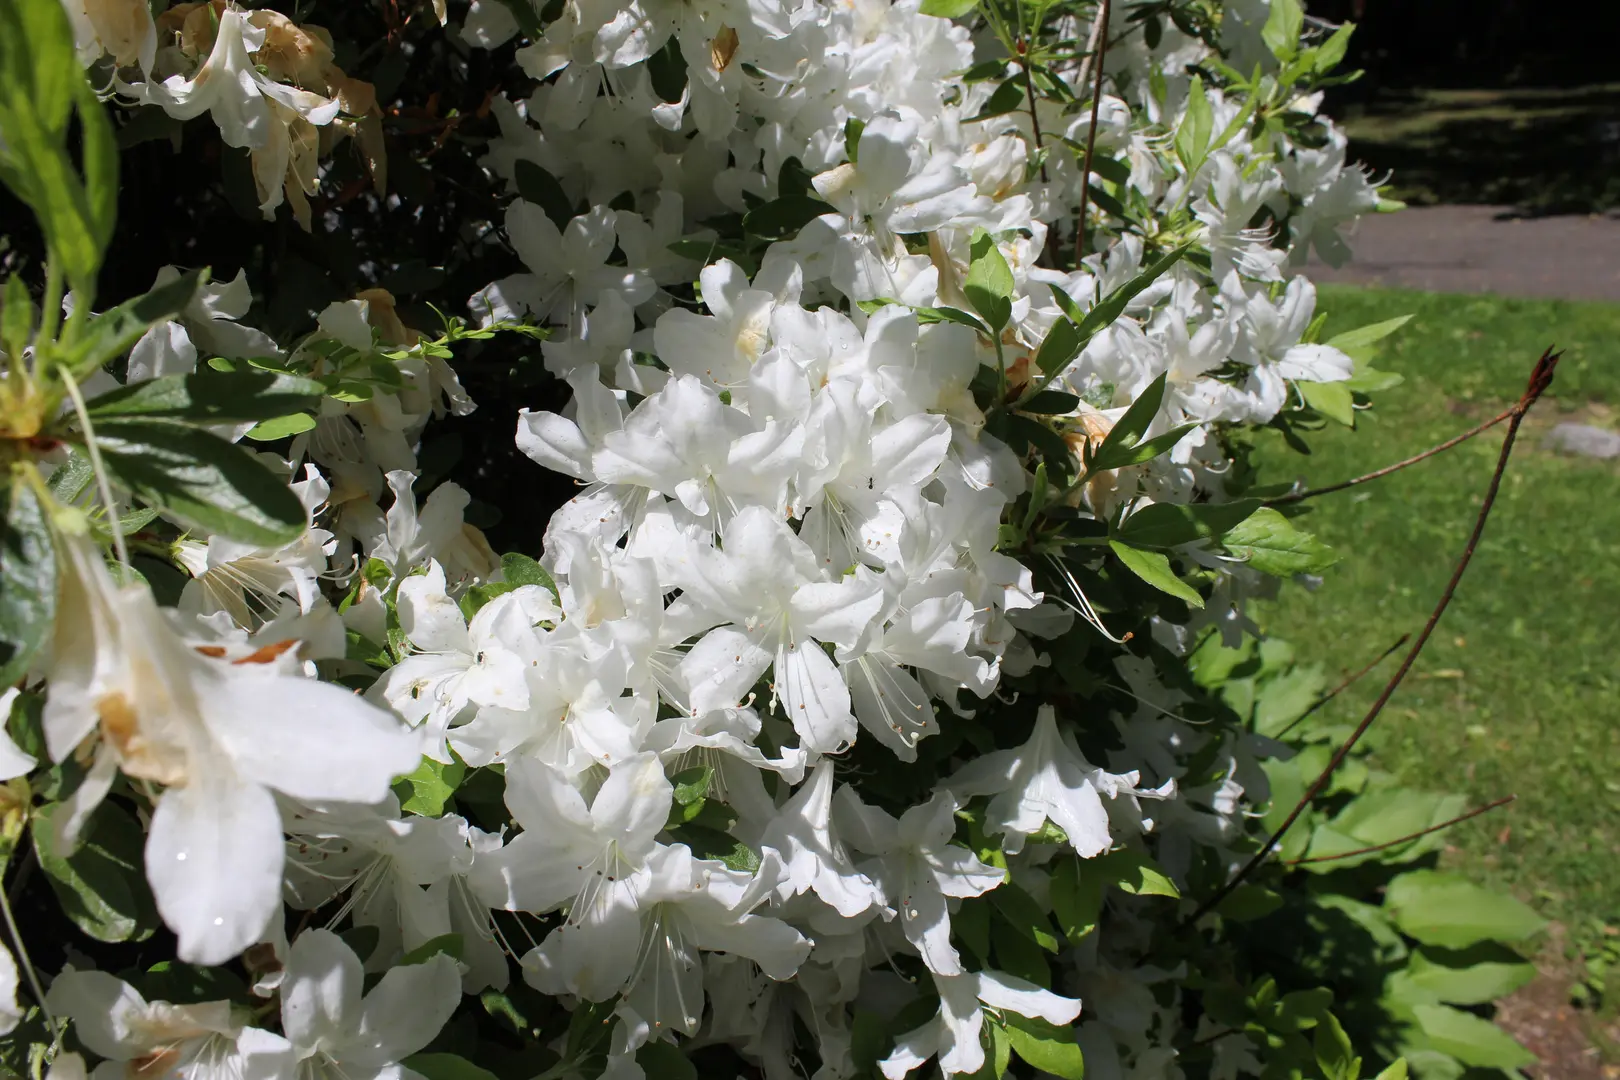 A view of a plant with a bunch of white flowers